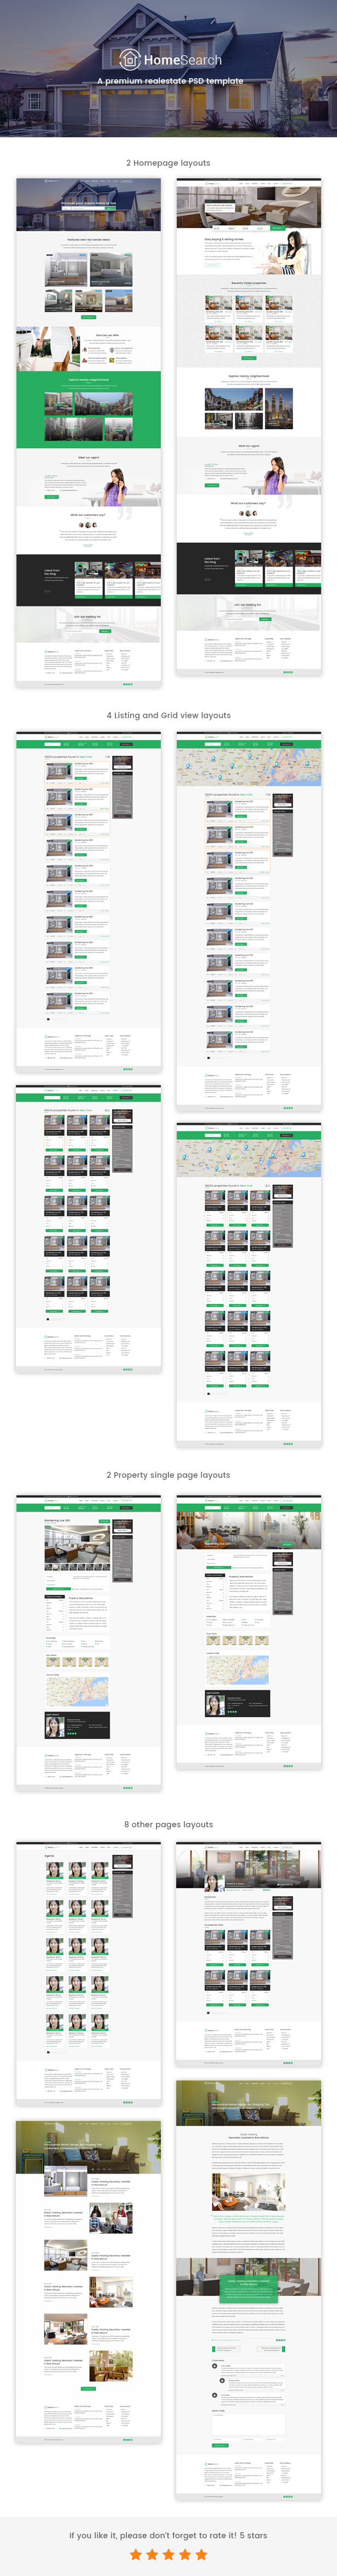 HomeSearch - A RealEstate HTML5 Template - 1